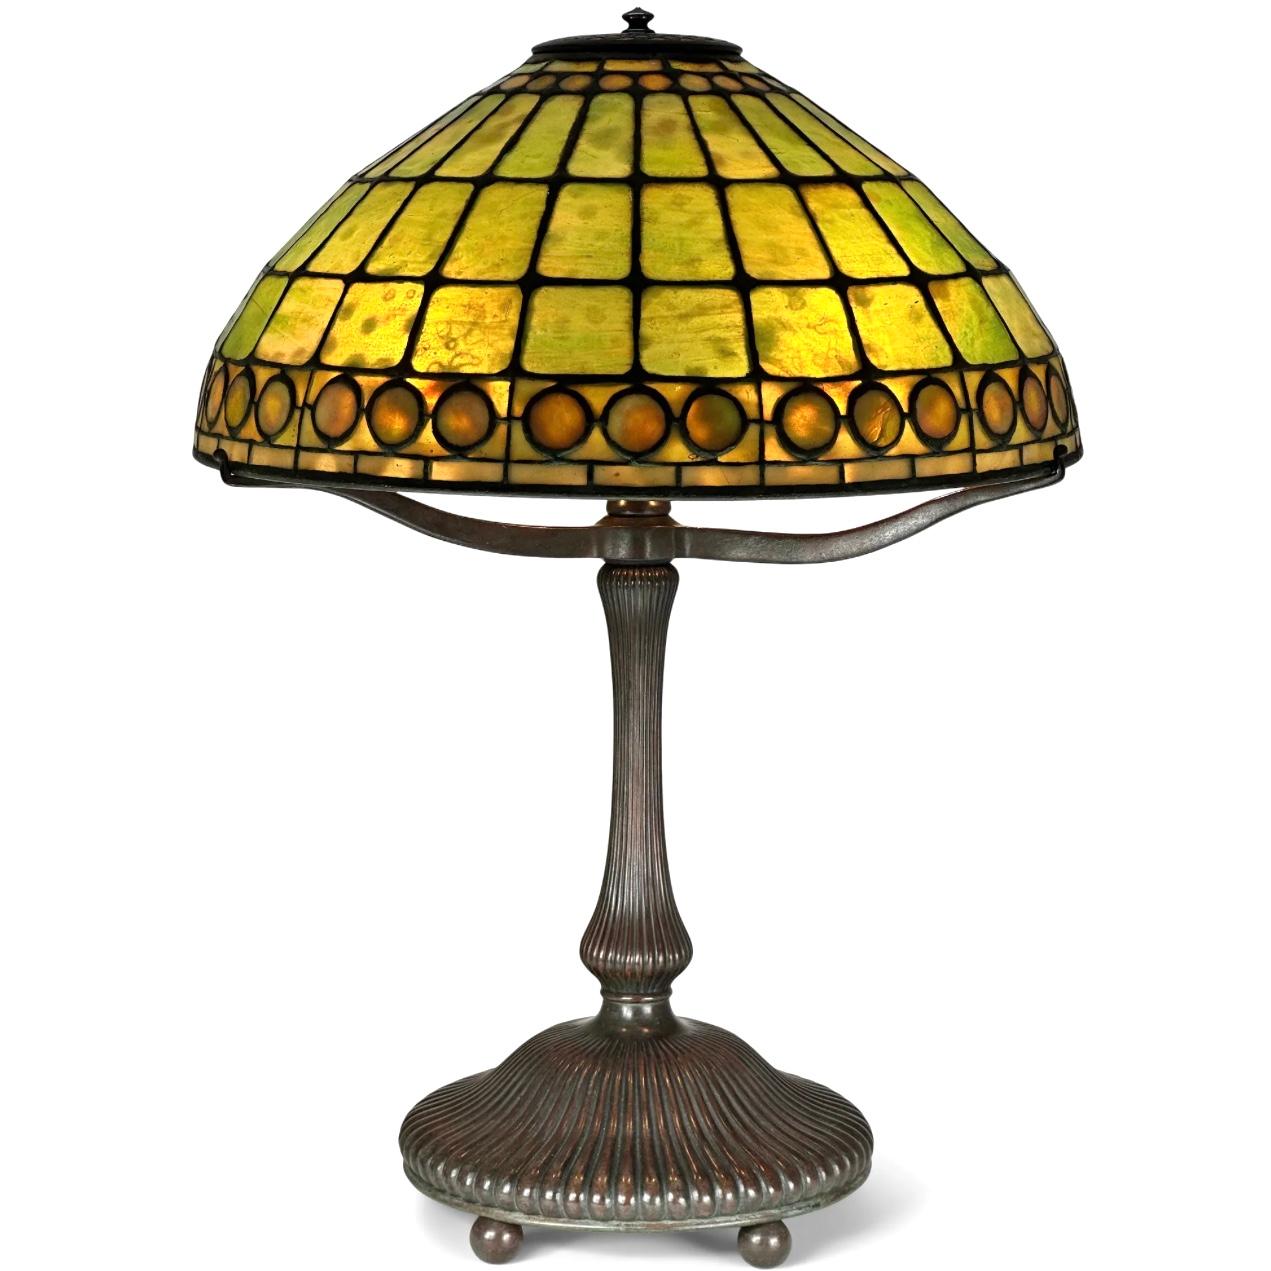 Art Nouveau Tiffany Studios Jeweled Colonial Table Lamp For Sale